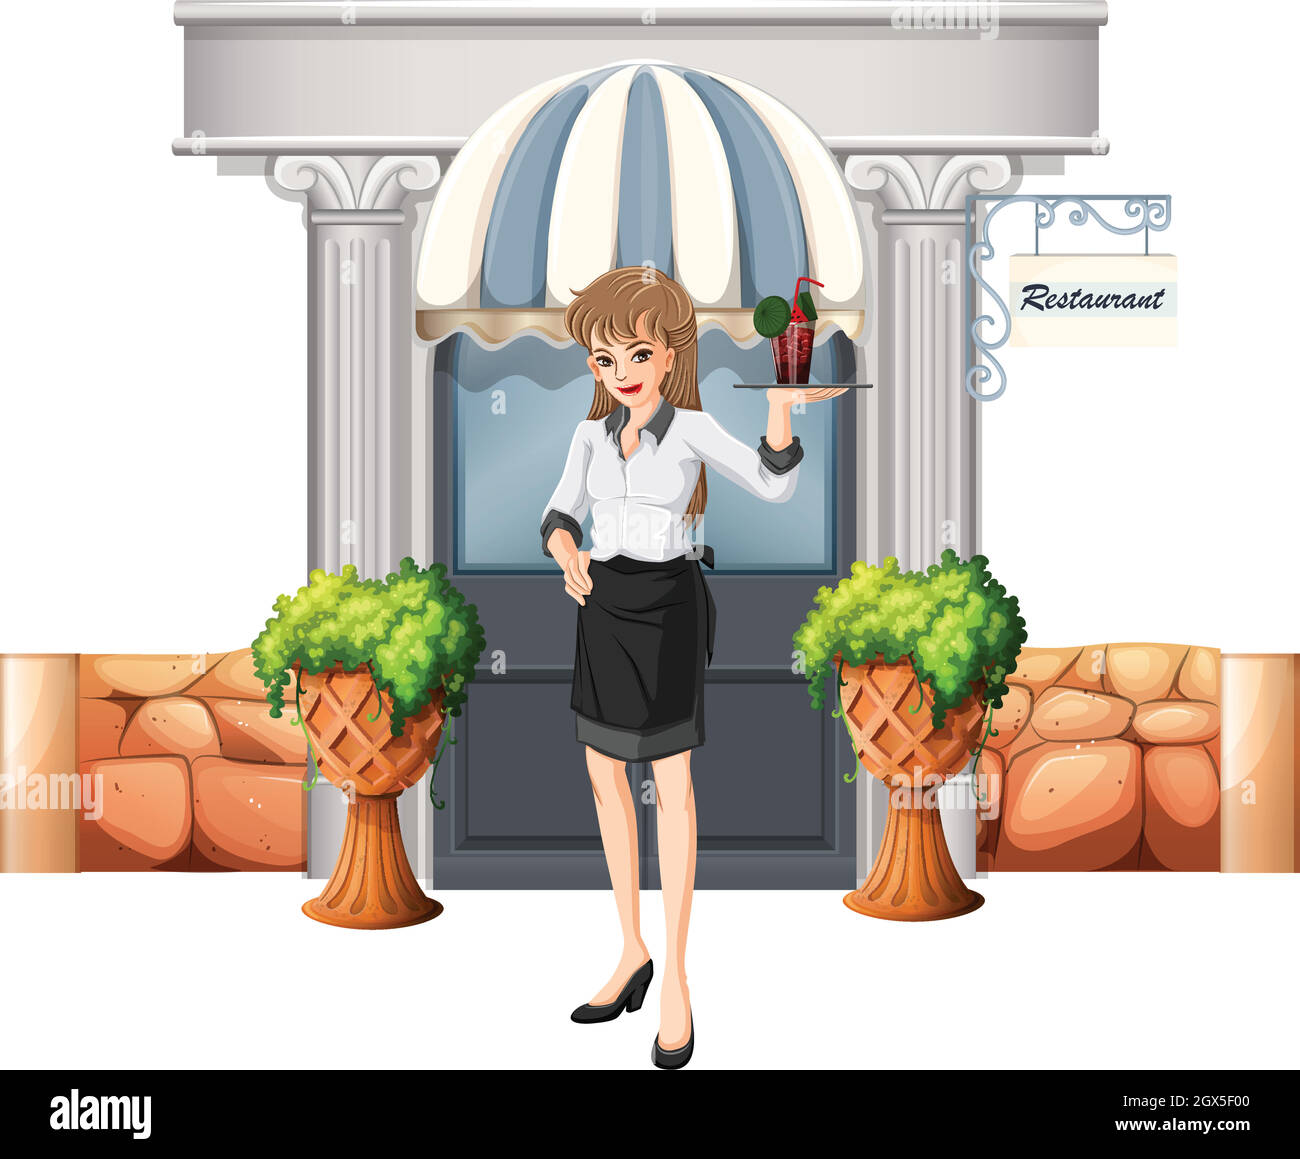 A waitress holding a tray in front of the restaurant Stock Vector